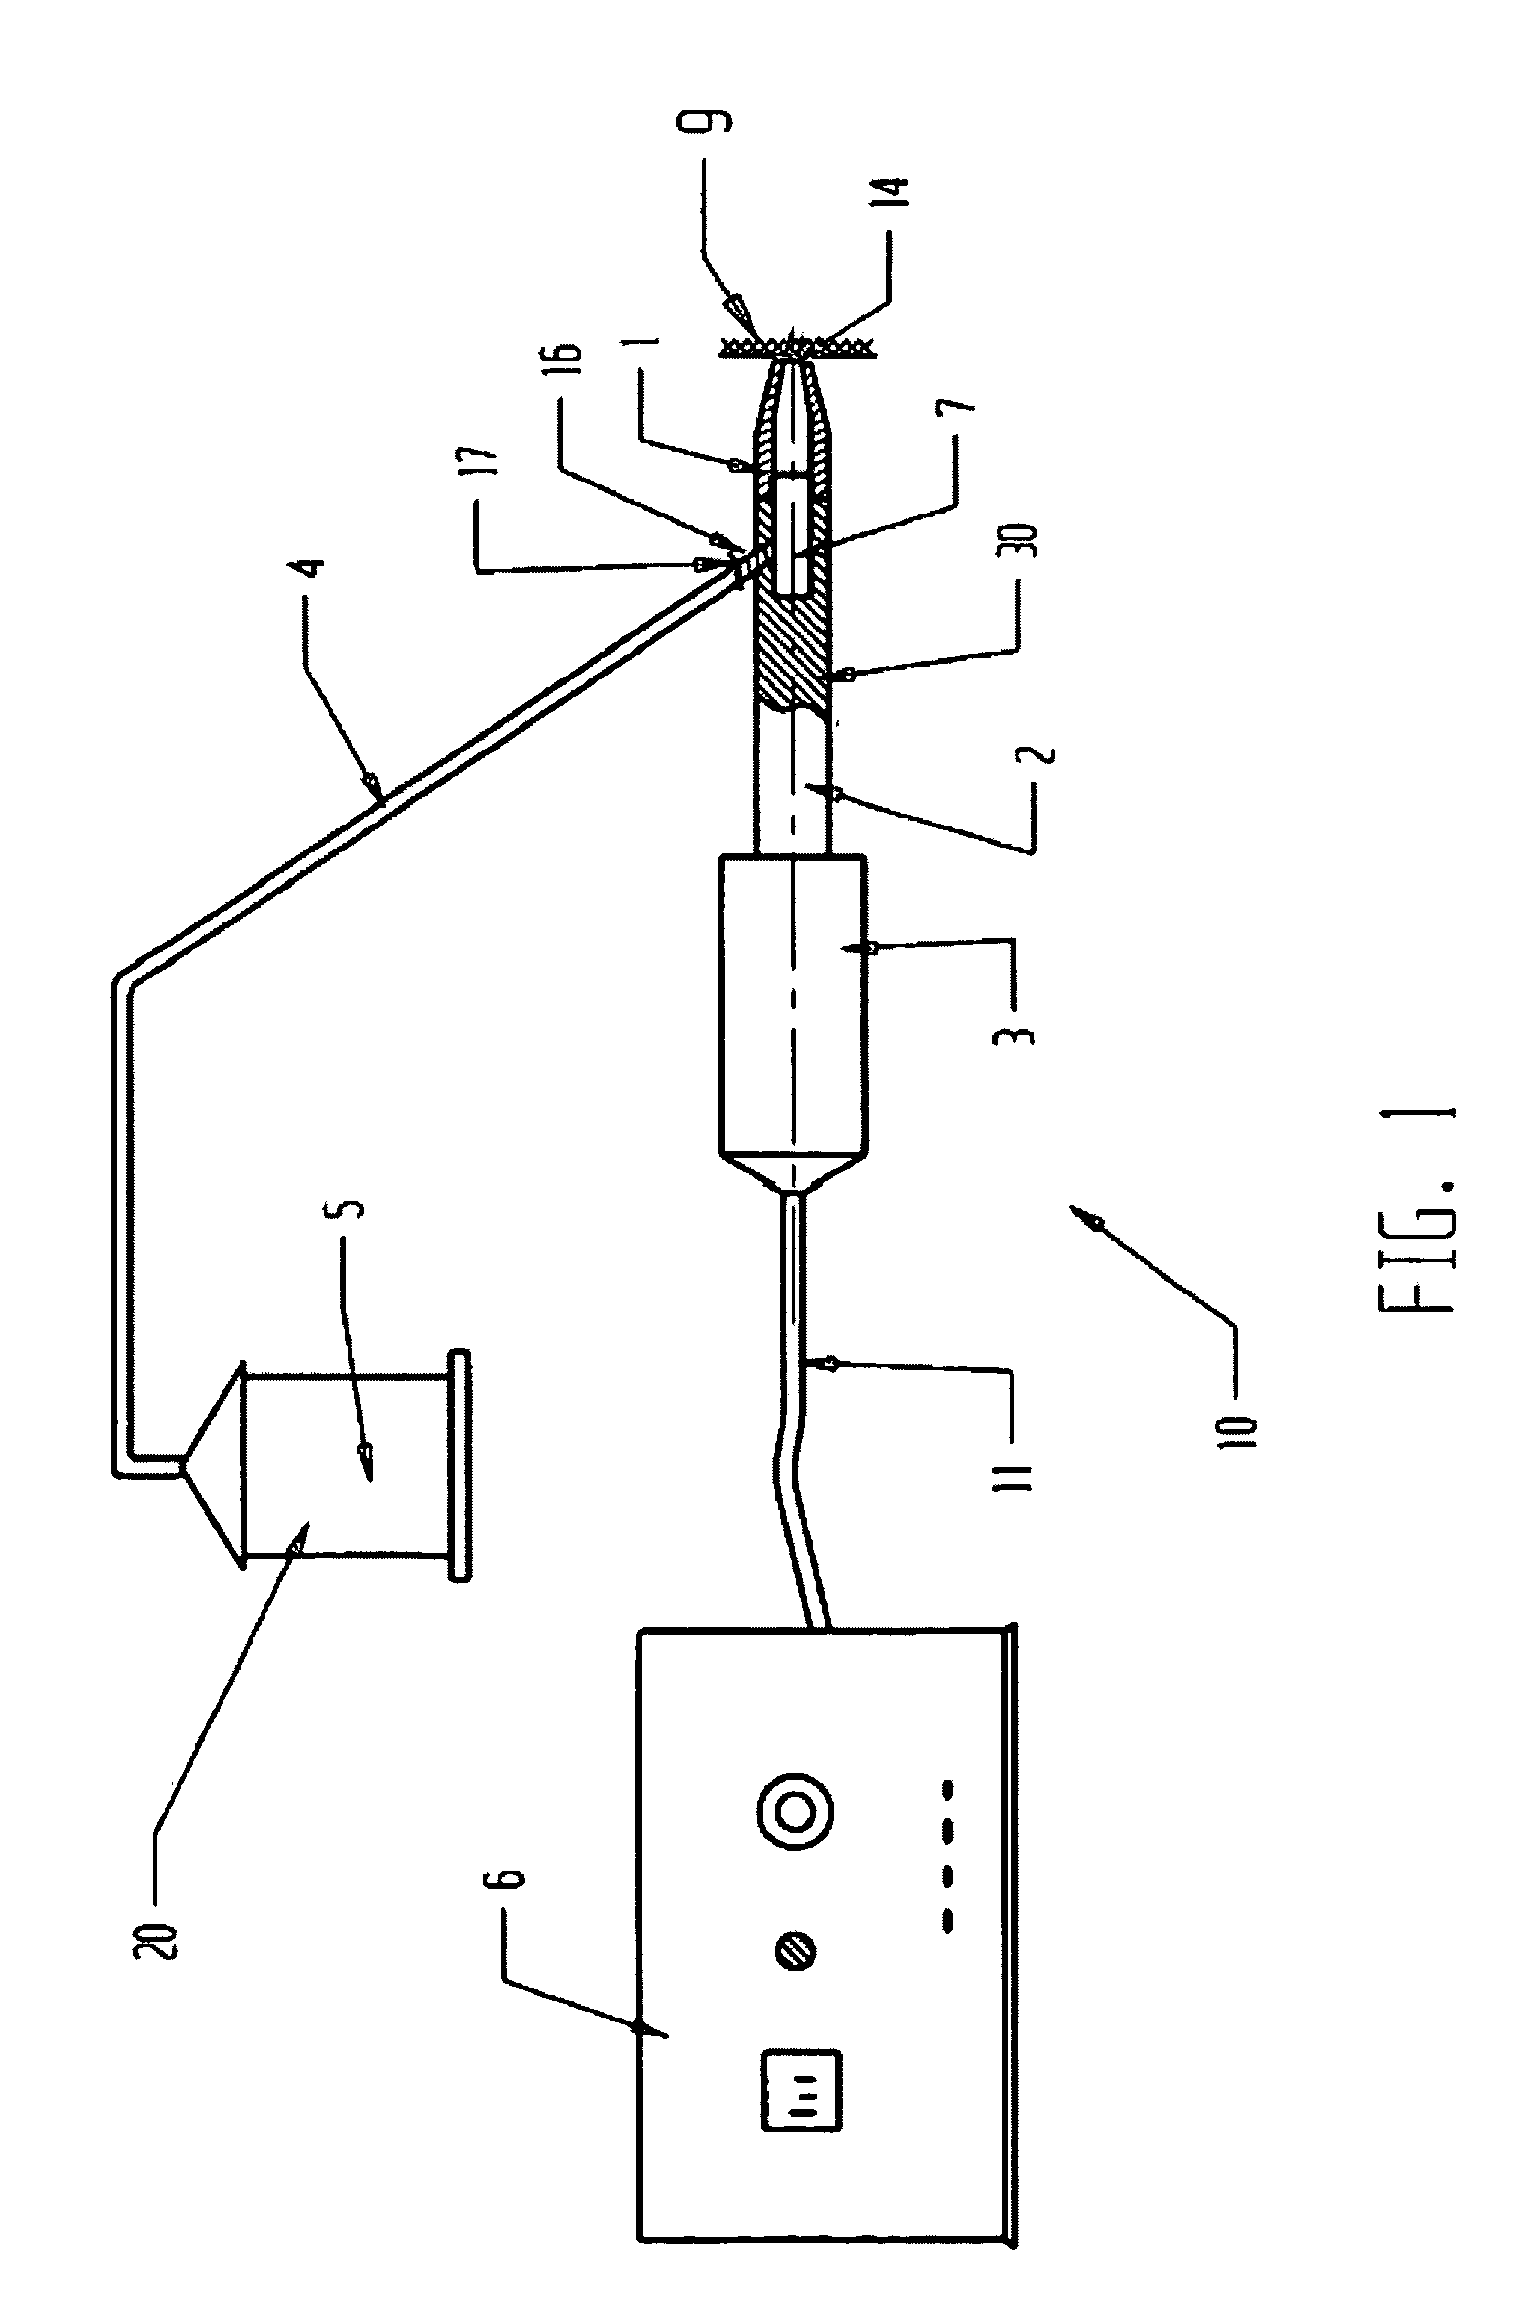 Apparatus and methods for the selective removal of tissue using combinations of ultrasonic energy and cryogenic energy